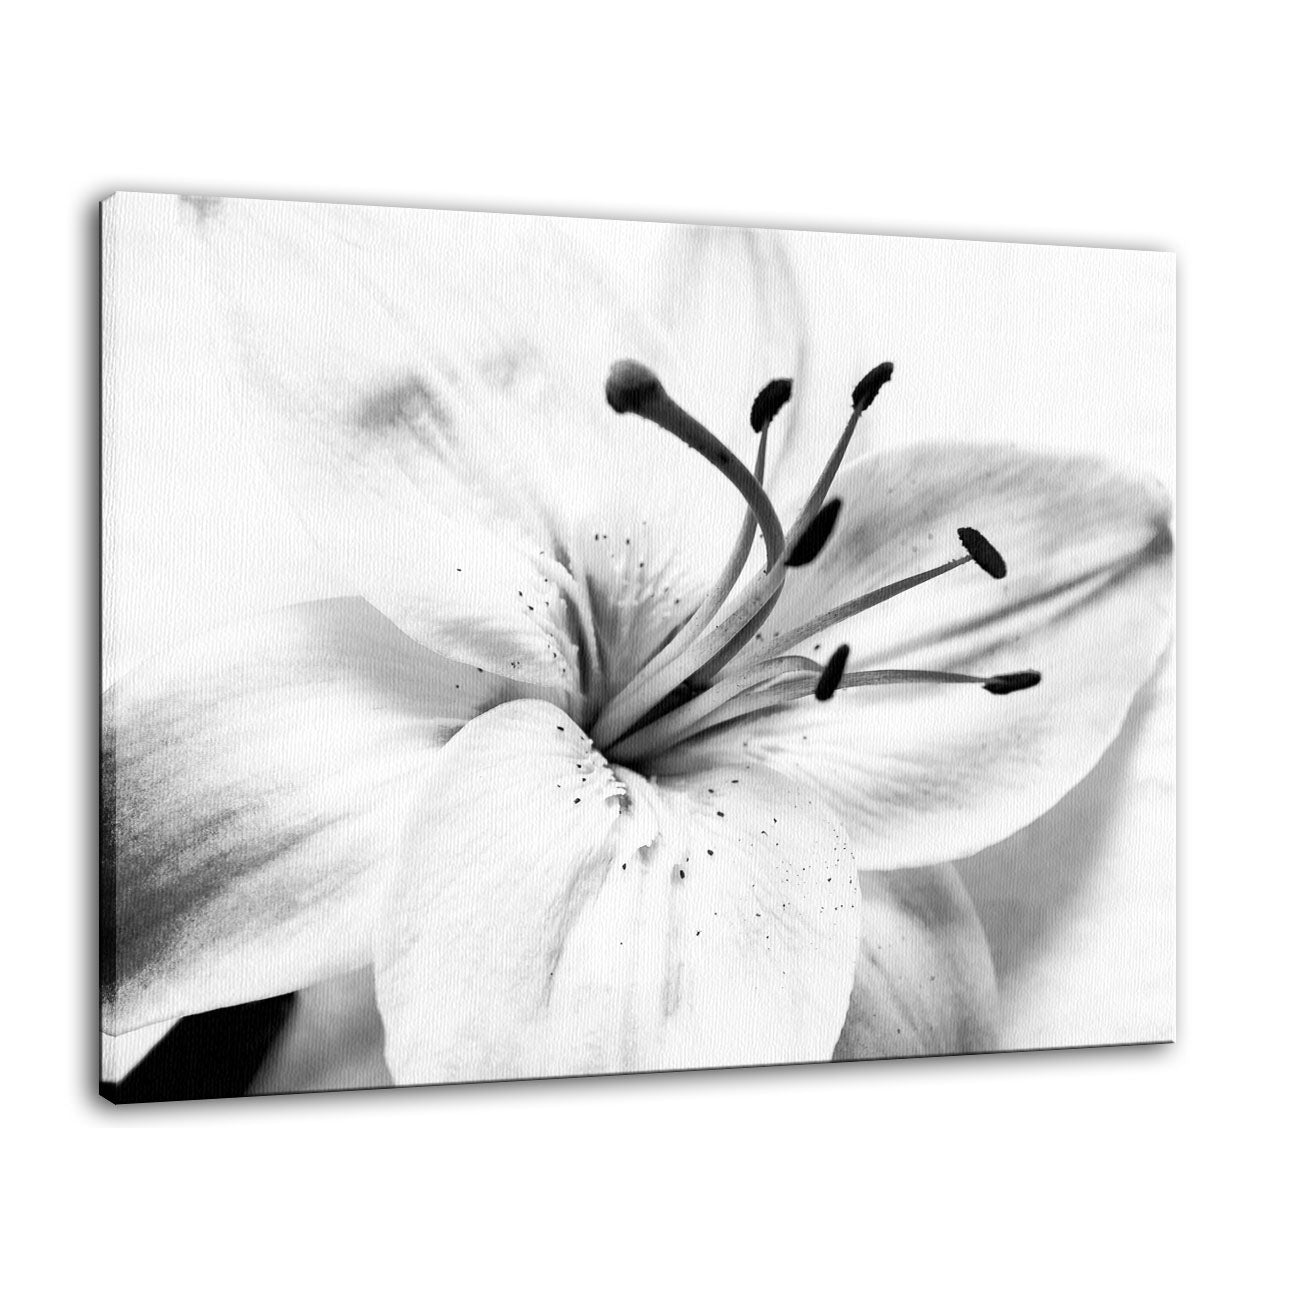 High Key Lily Black & White Nature / Floral Photo Fine Art Canvas Wall Art Prints  - PIPAFINEART